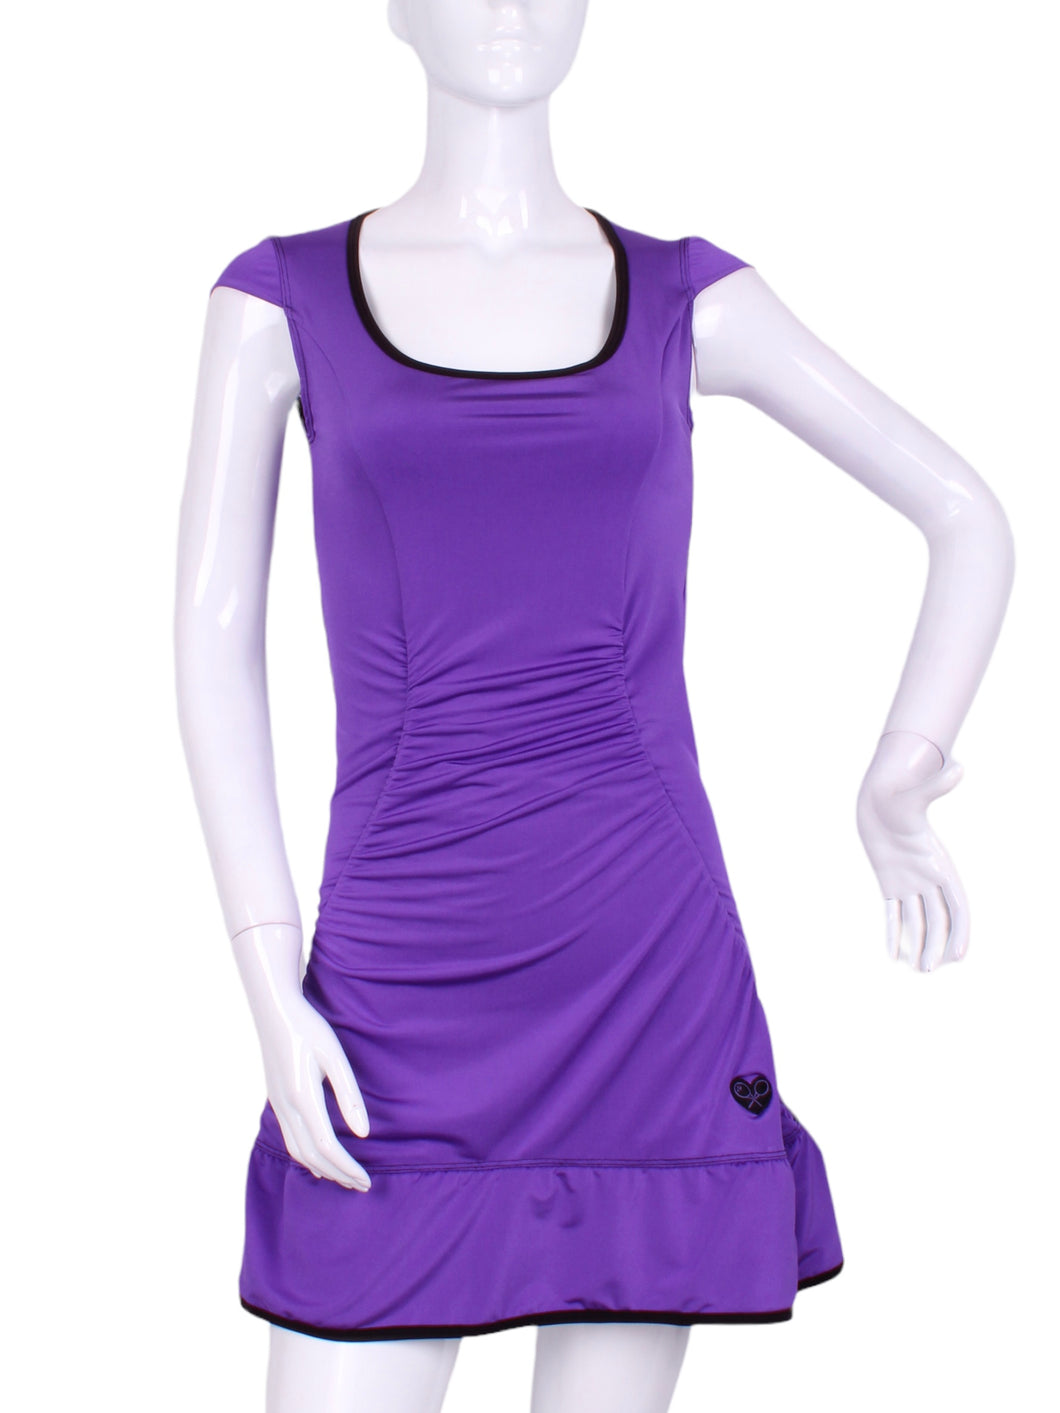 The Purple Monroe Tennis Dress With Ruching - I LOVE MY DOUBLES PARTNER!!!